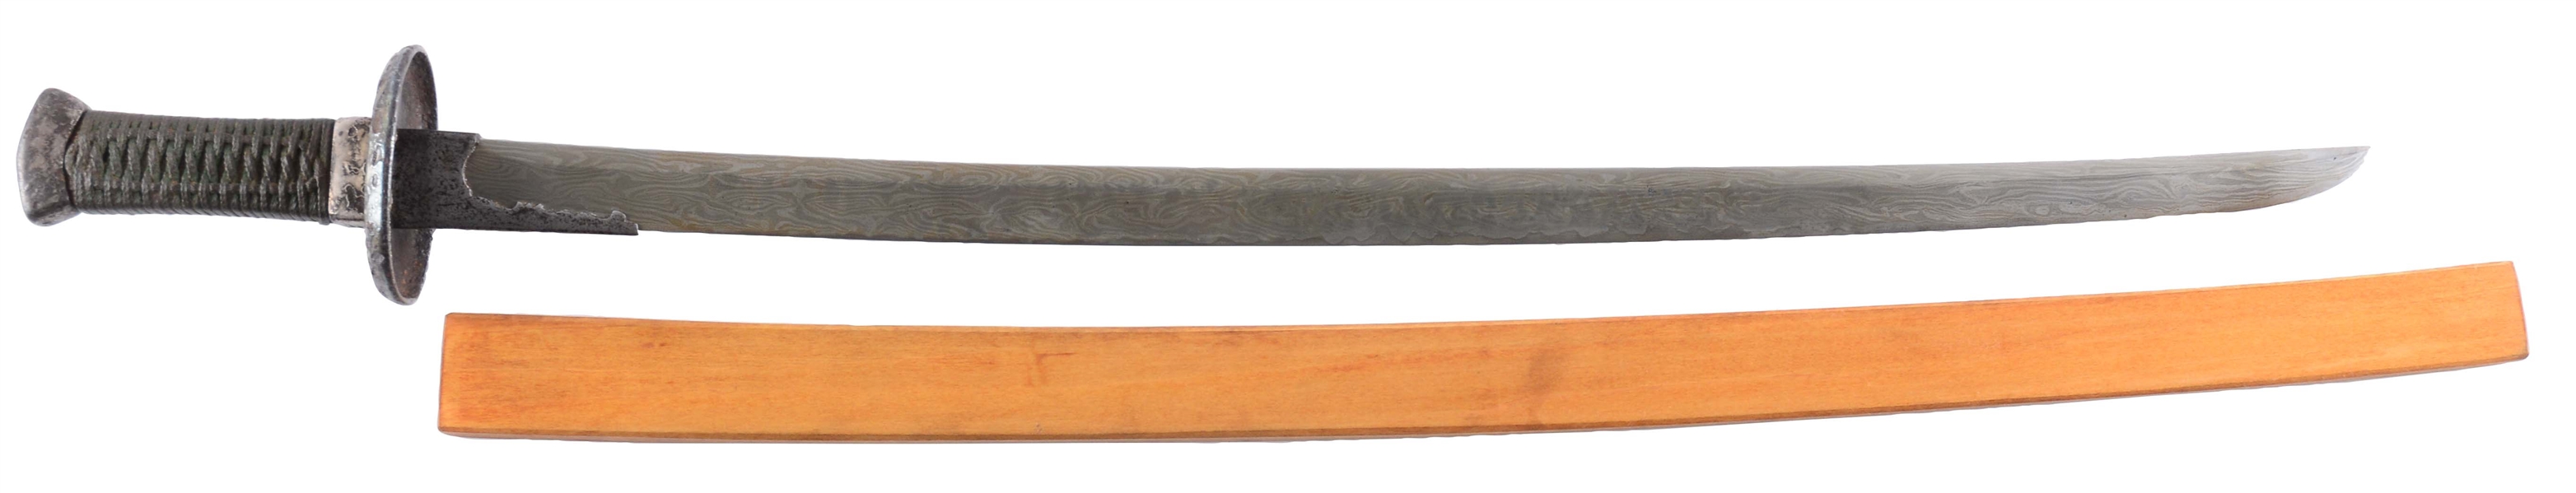 FINE CHINESE DAO WITH PATTERN WELDED BLADE AND CLOSE-PLATED INLAID IRON HILT.